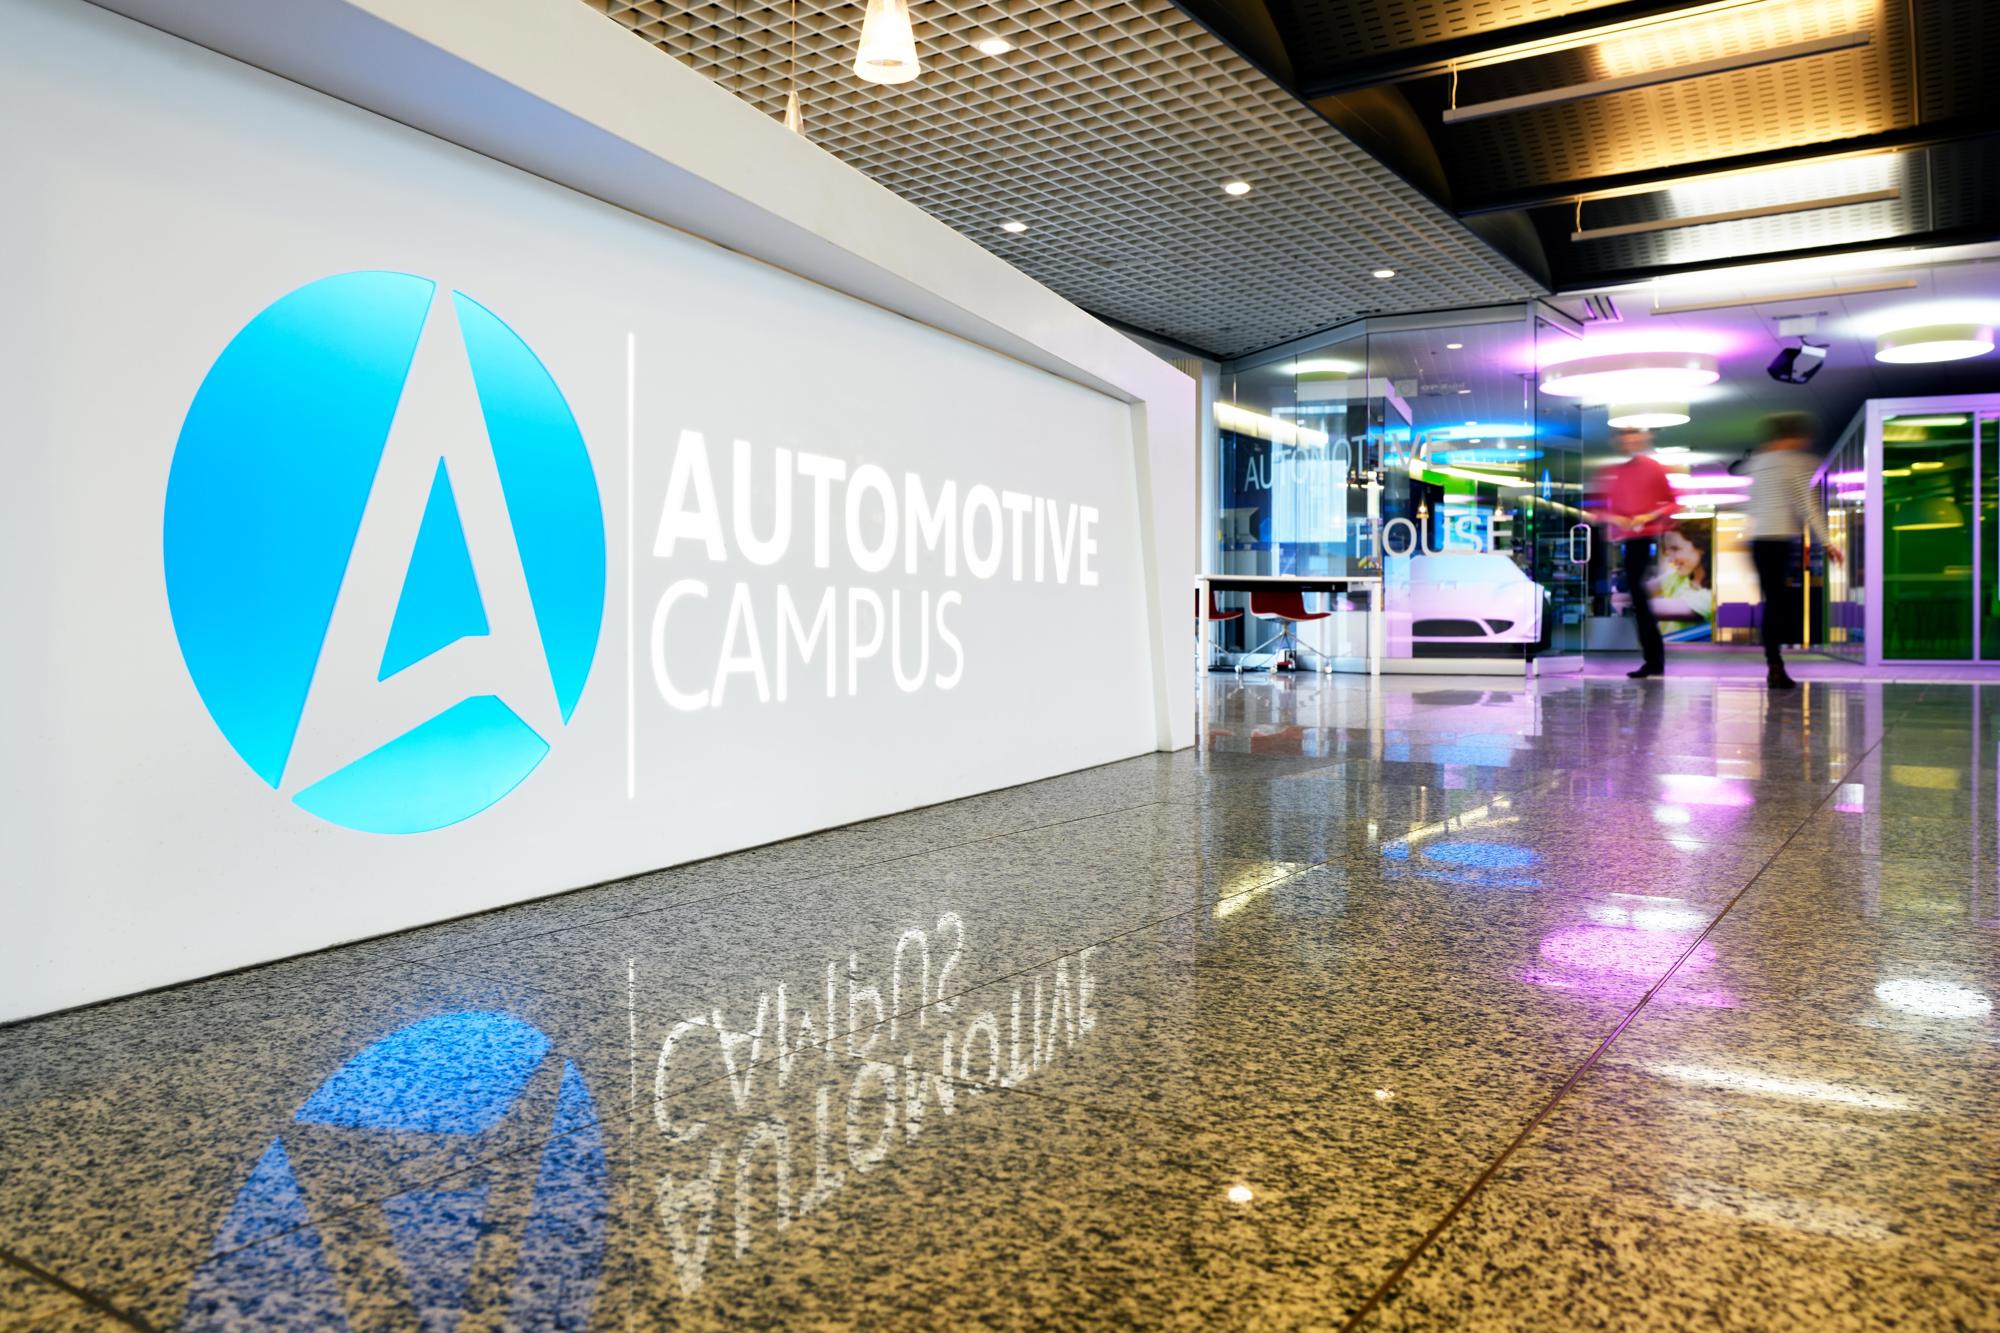 The Automotive Campus in Helmond is a breeding ground for innovations in the mobility field